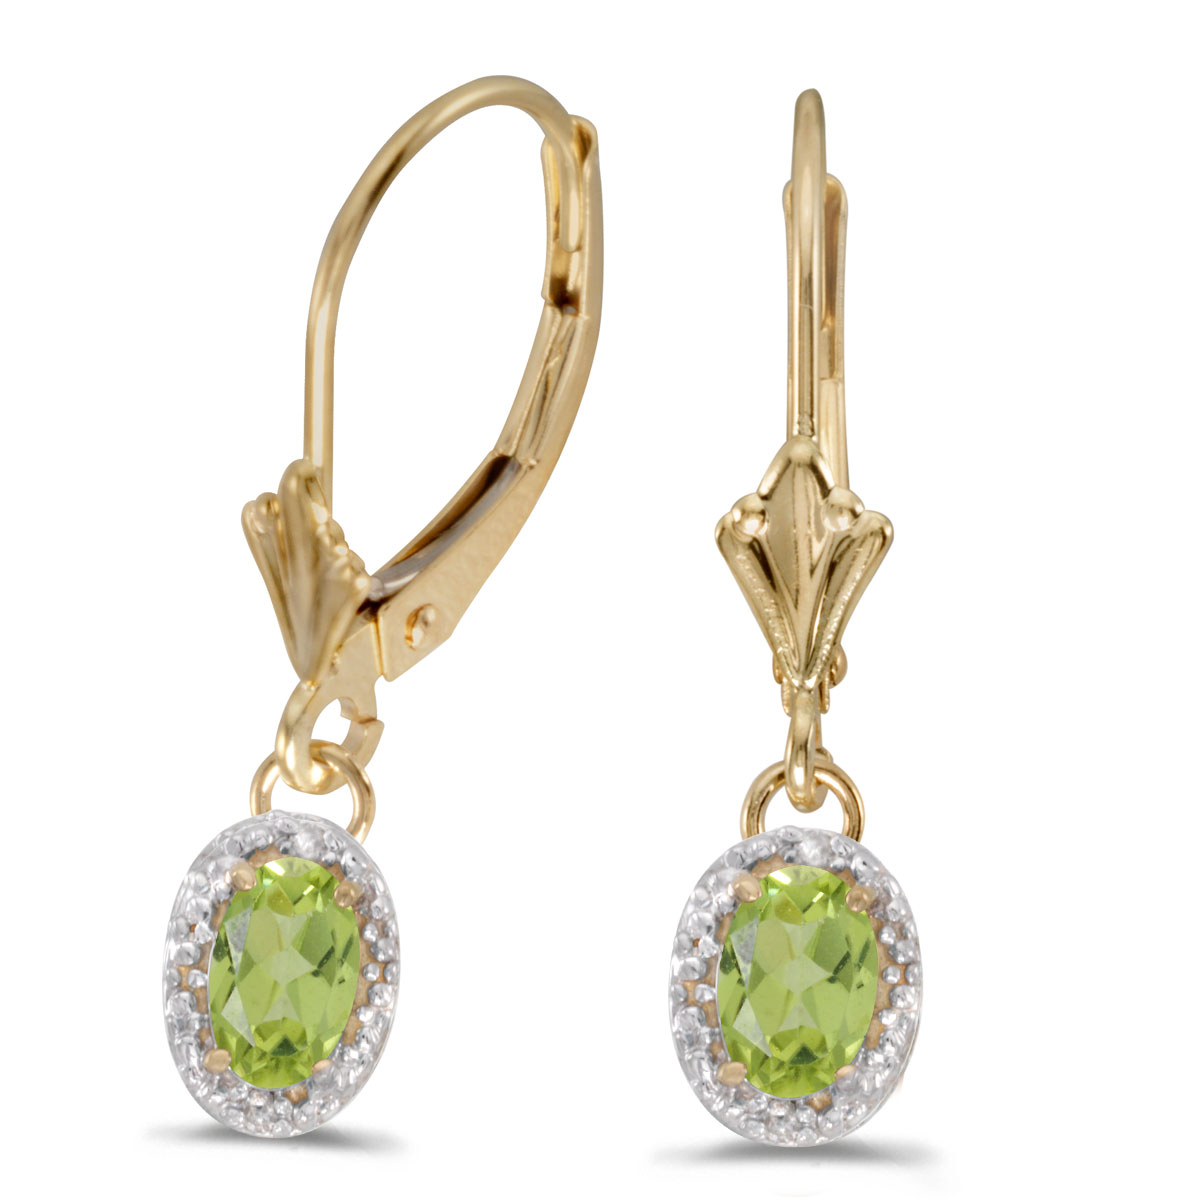 Beautiful 10k yellow gold leverback earrings with pretty 6x4 mm peridots complemented with bright...